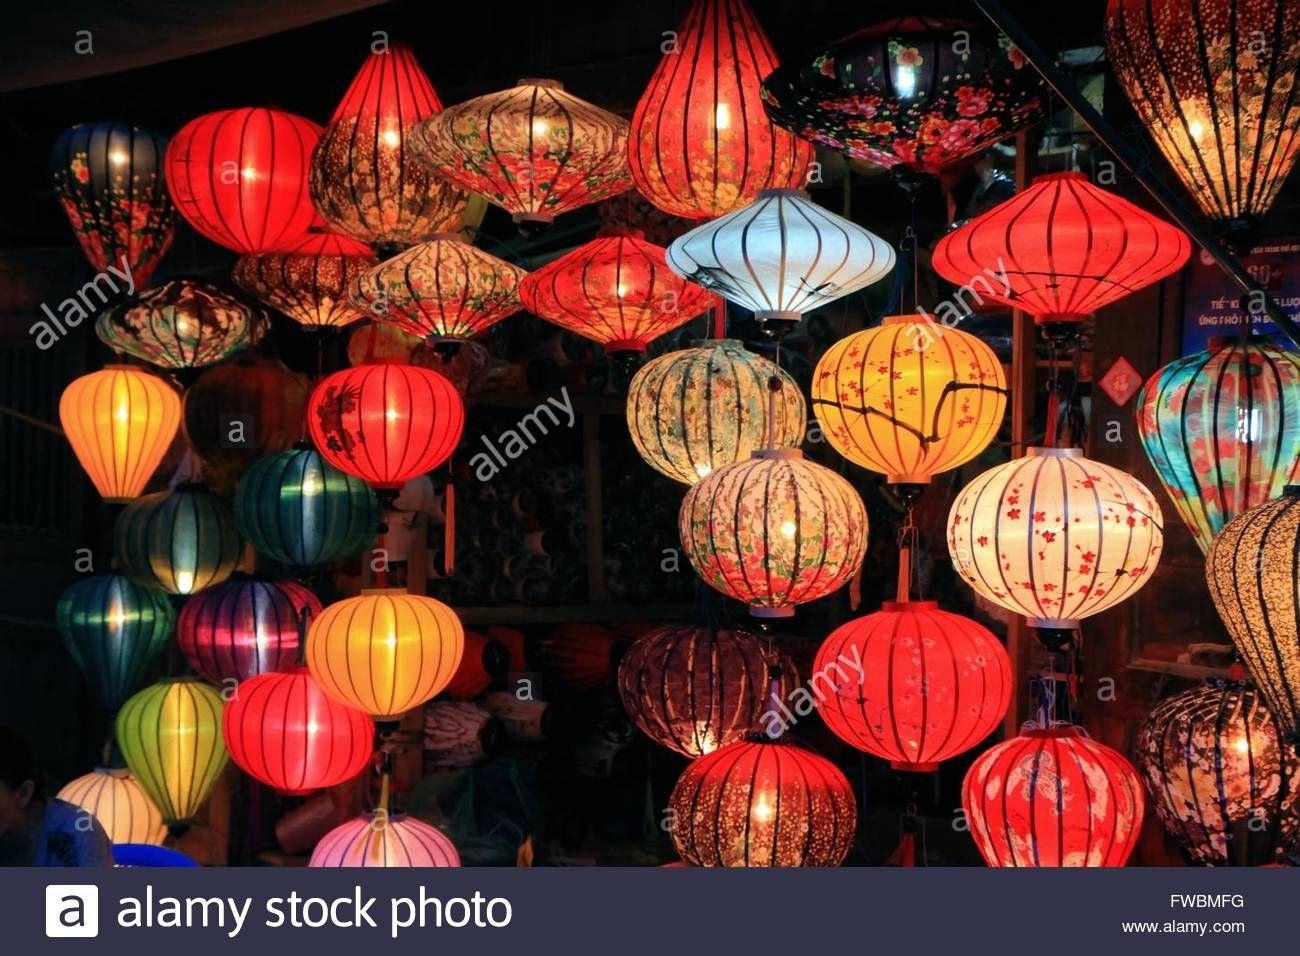 Traditional Silk And Bamboo Lanterns For Sale In Hoi An, Vietnam Regarding Outdoor Vietnamese Lanterns (View 14 of 20)